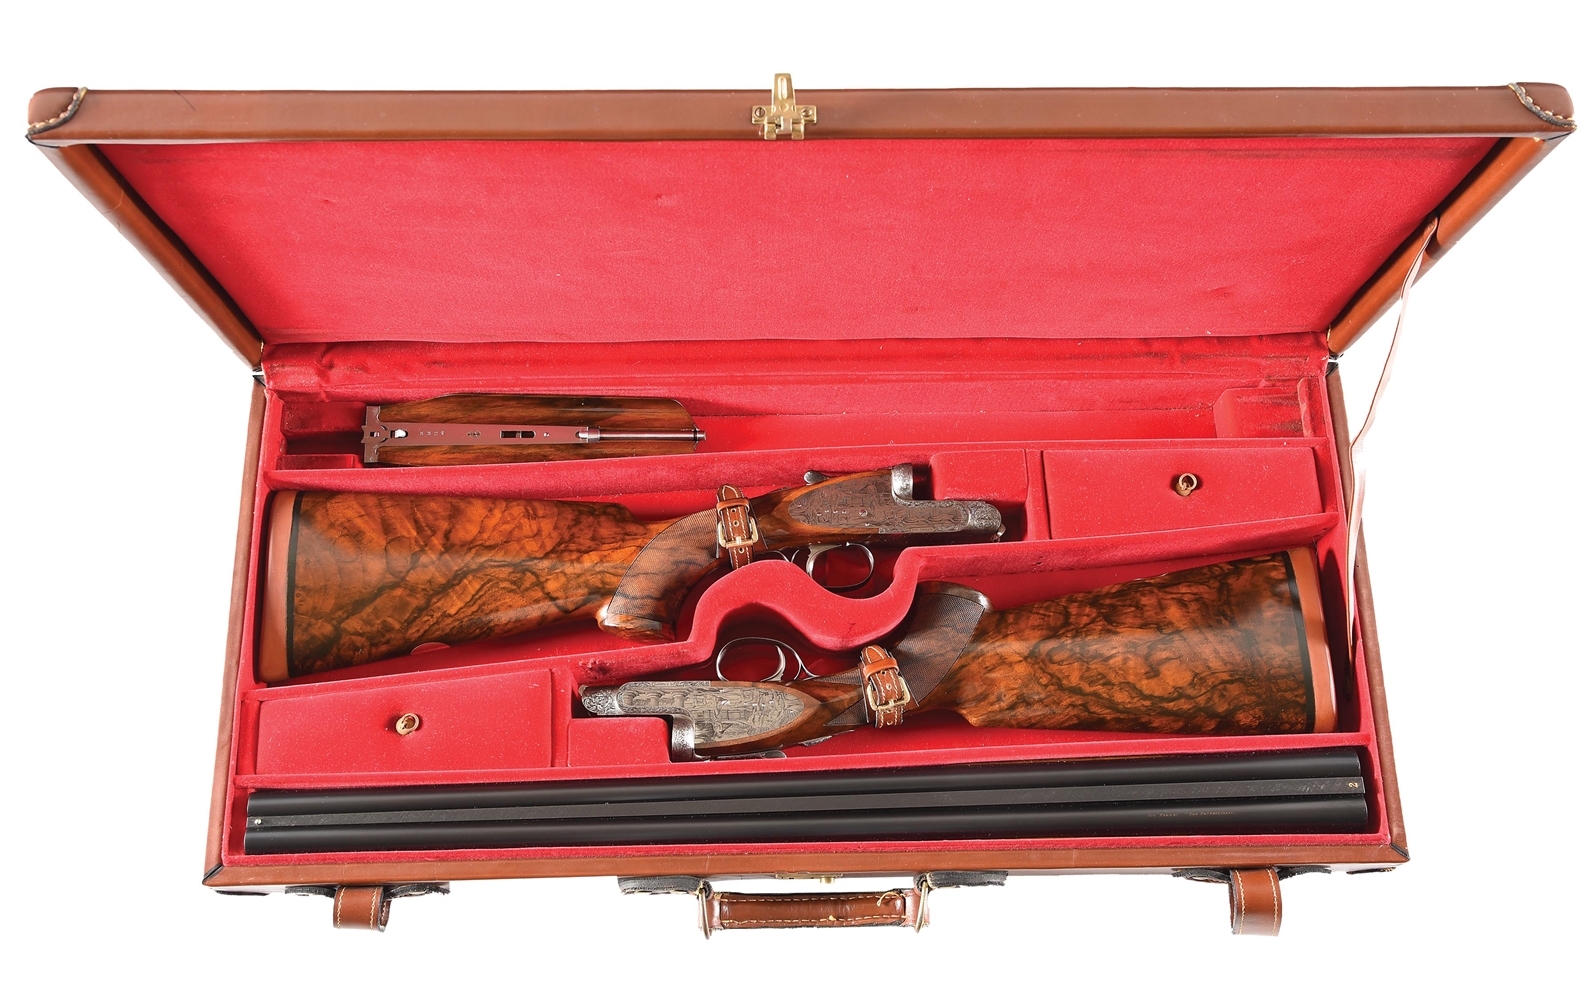 (M) PAIR OF IVO FABBRI SIDELOCK SIDE BY SIDE 12 GAUGE SHOTGUNS WITH ENGRAVED SCENES BY TOMASONI.